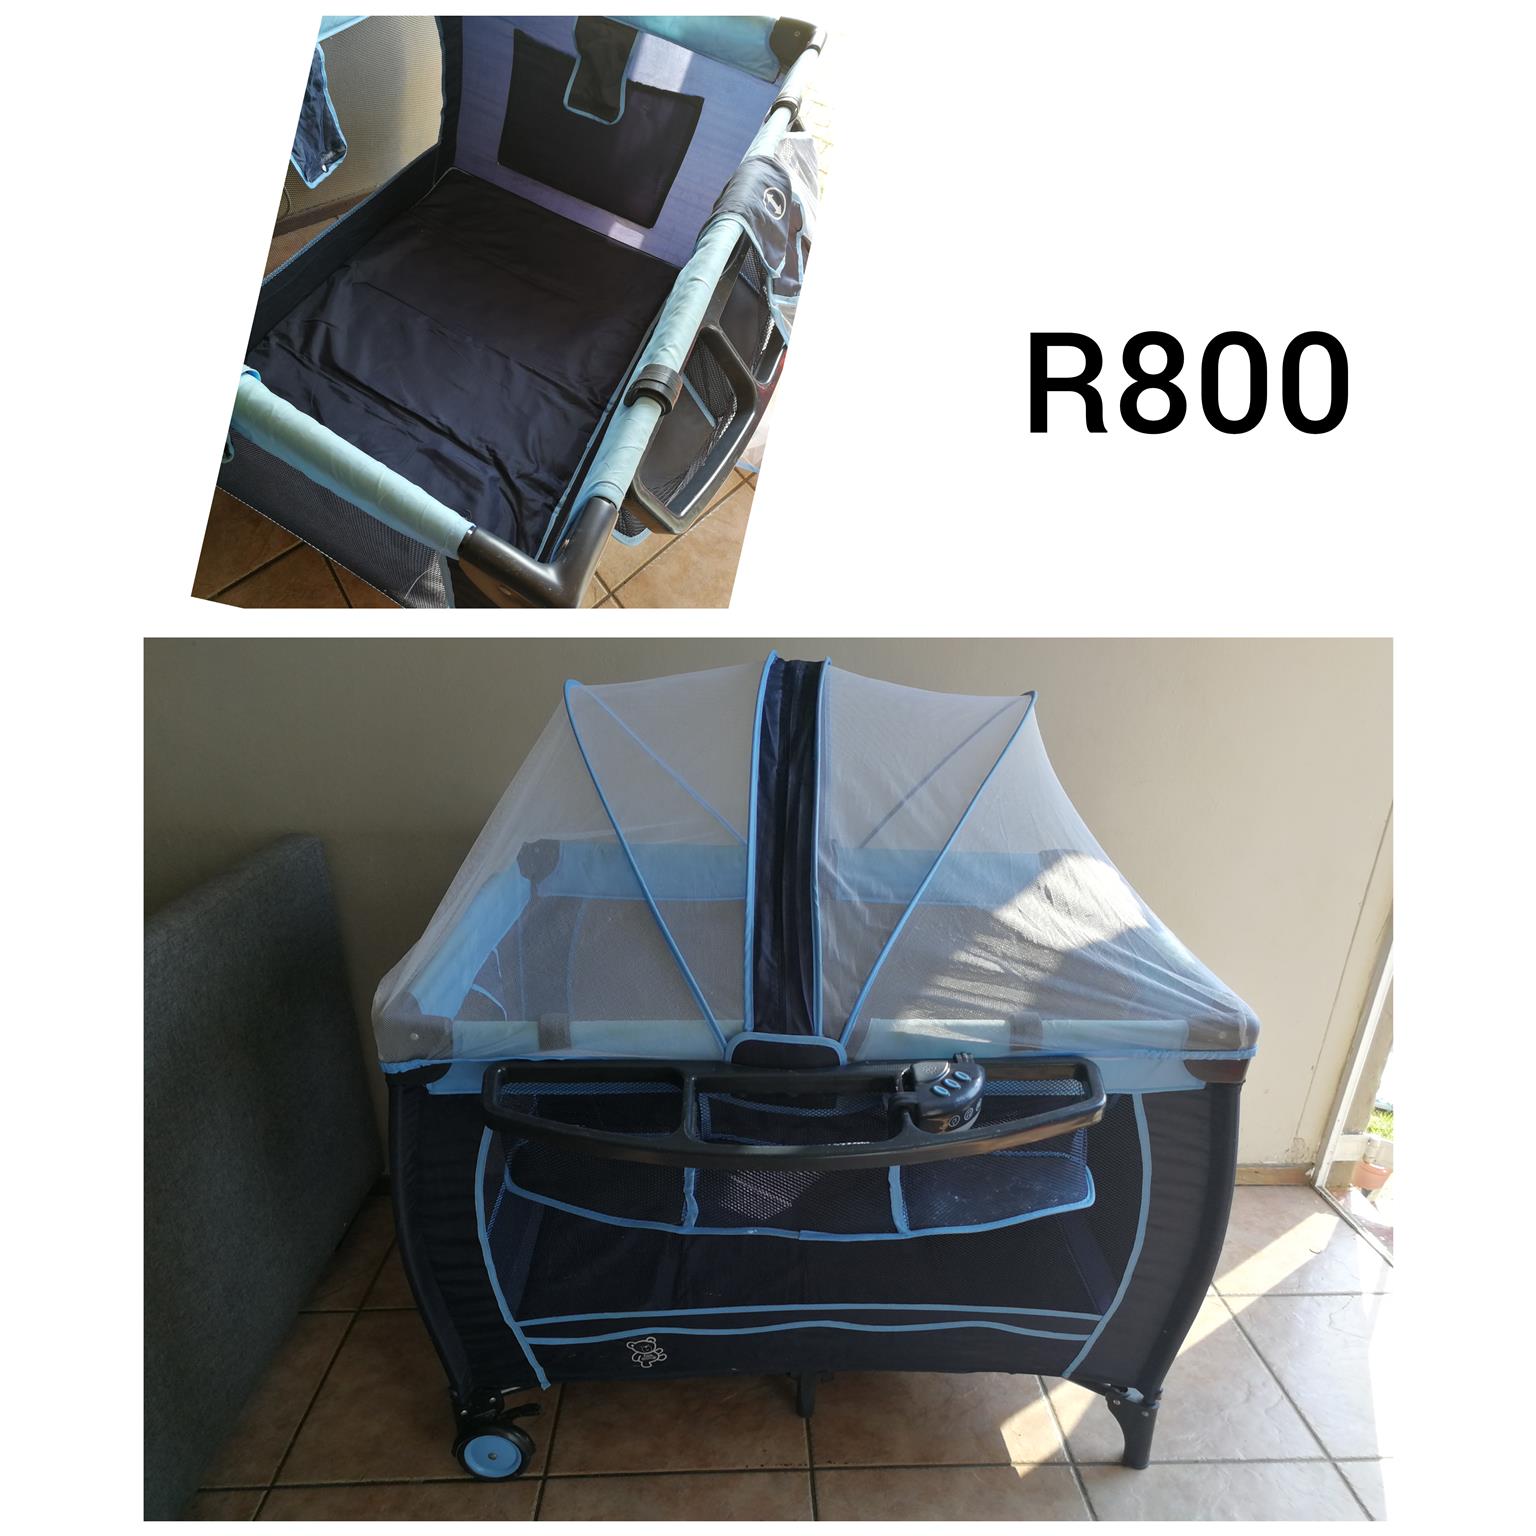 second hand cot for sale